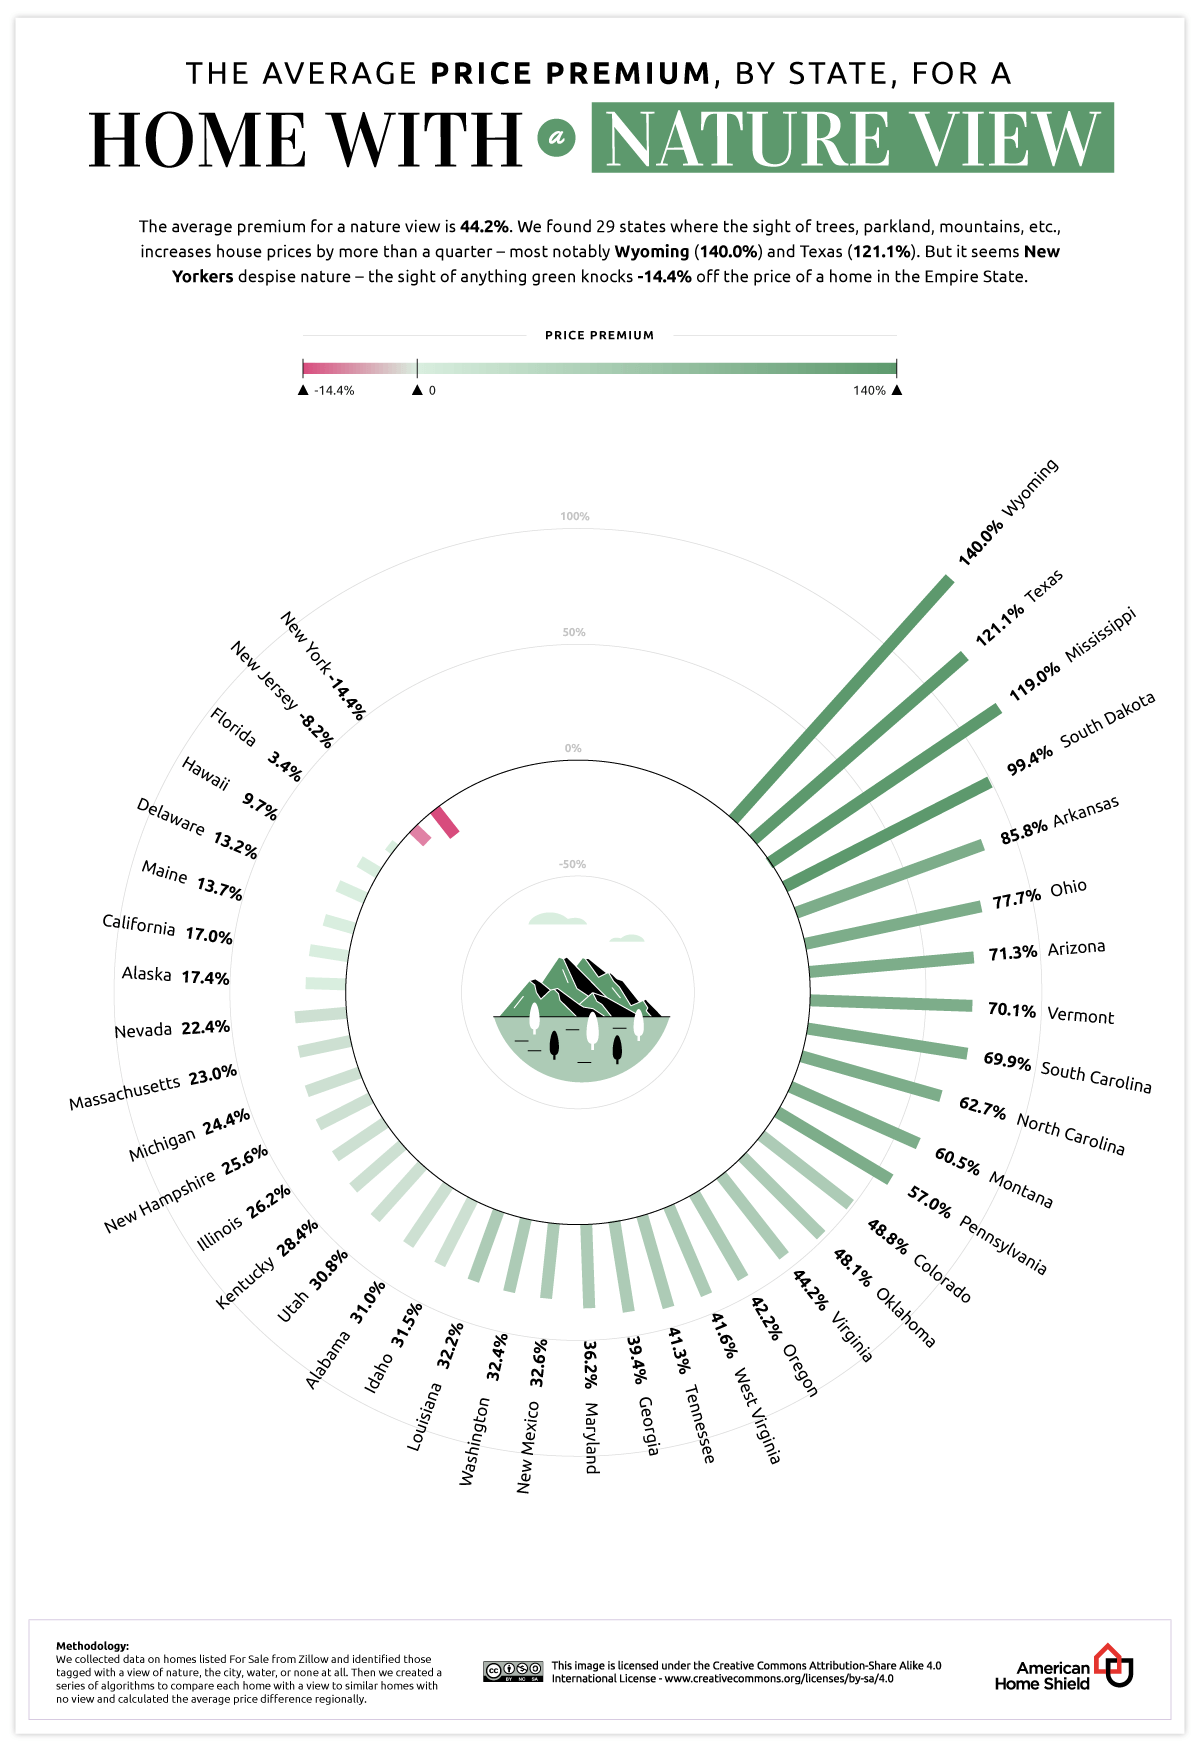 average price premium by state for a home with a nature view